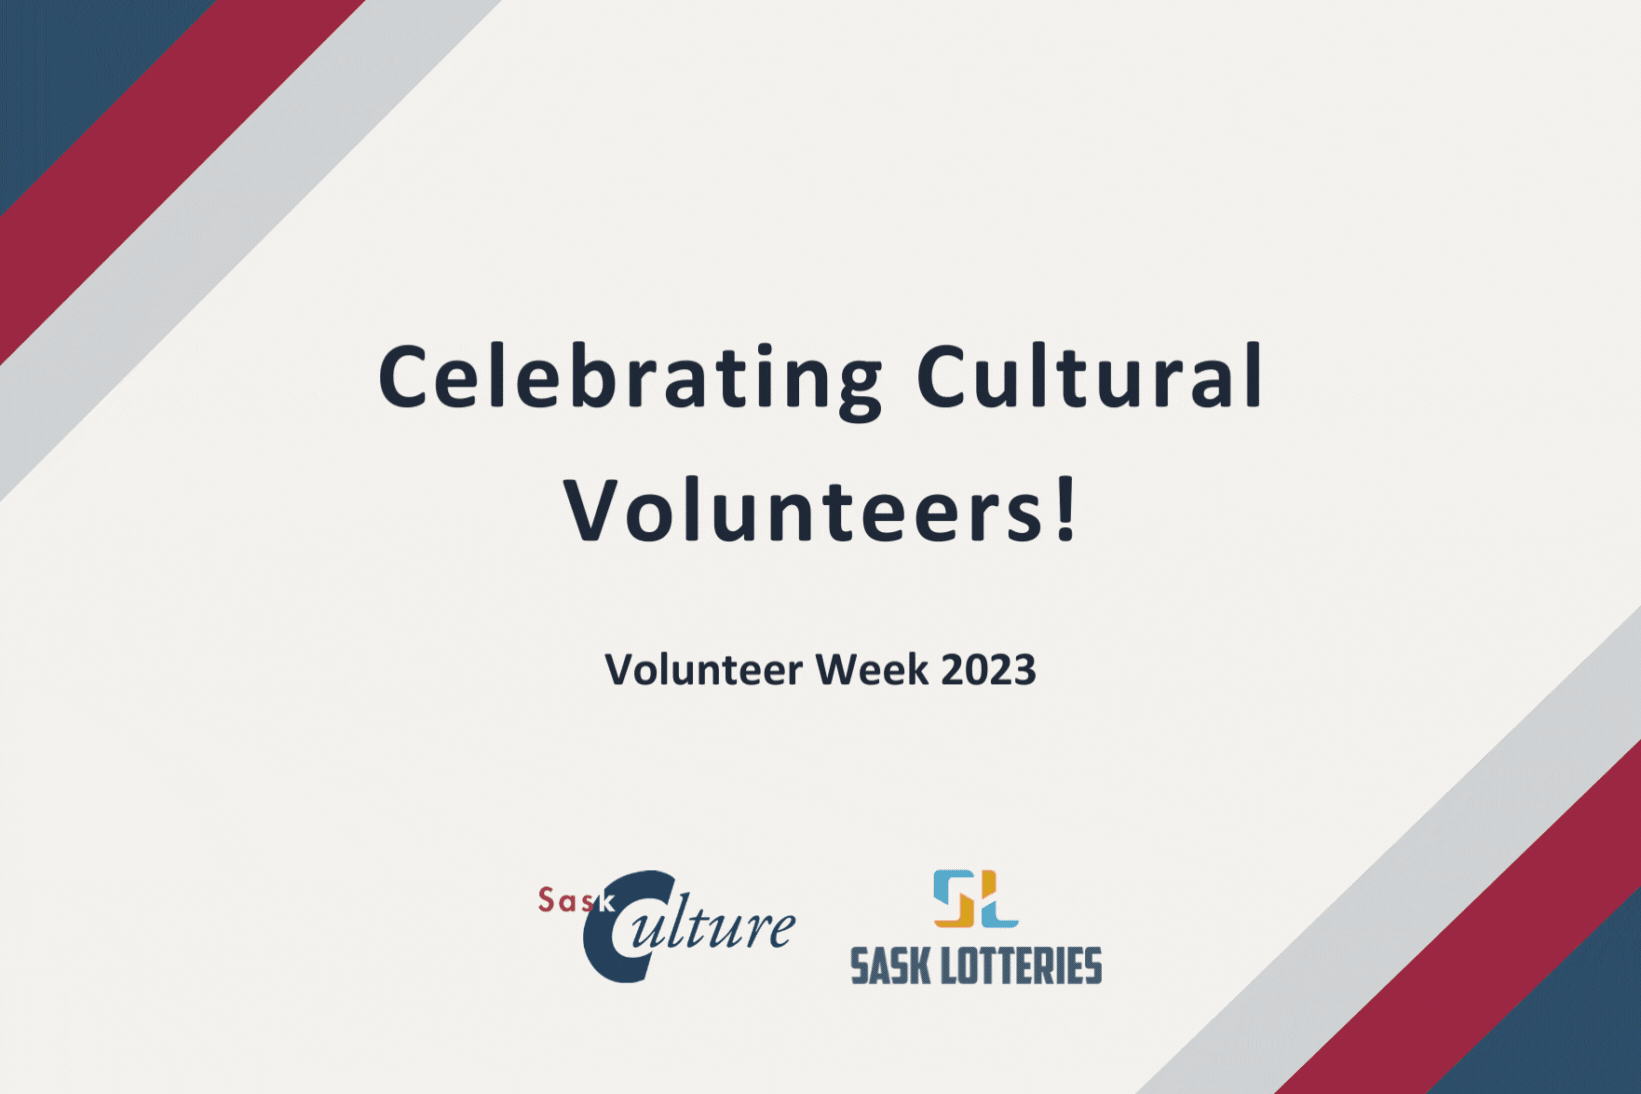 A gif showing photos and quotes of cultural volunteers from across Saskatchewan.